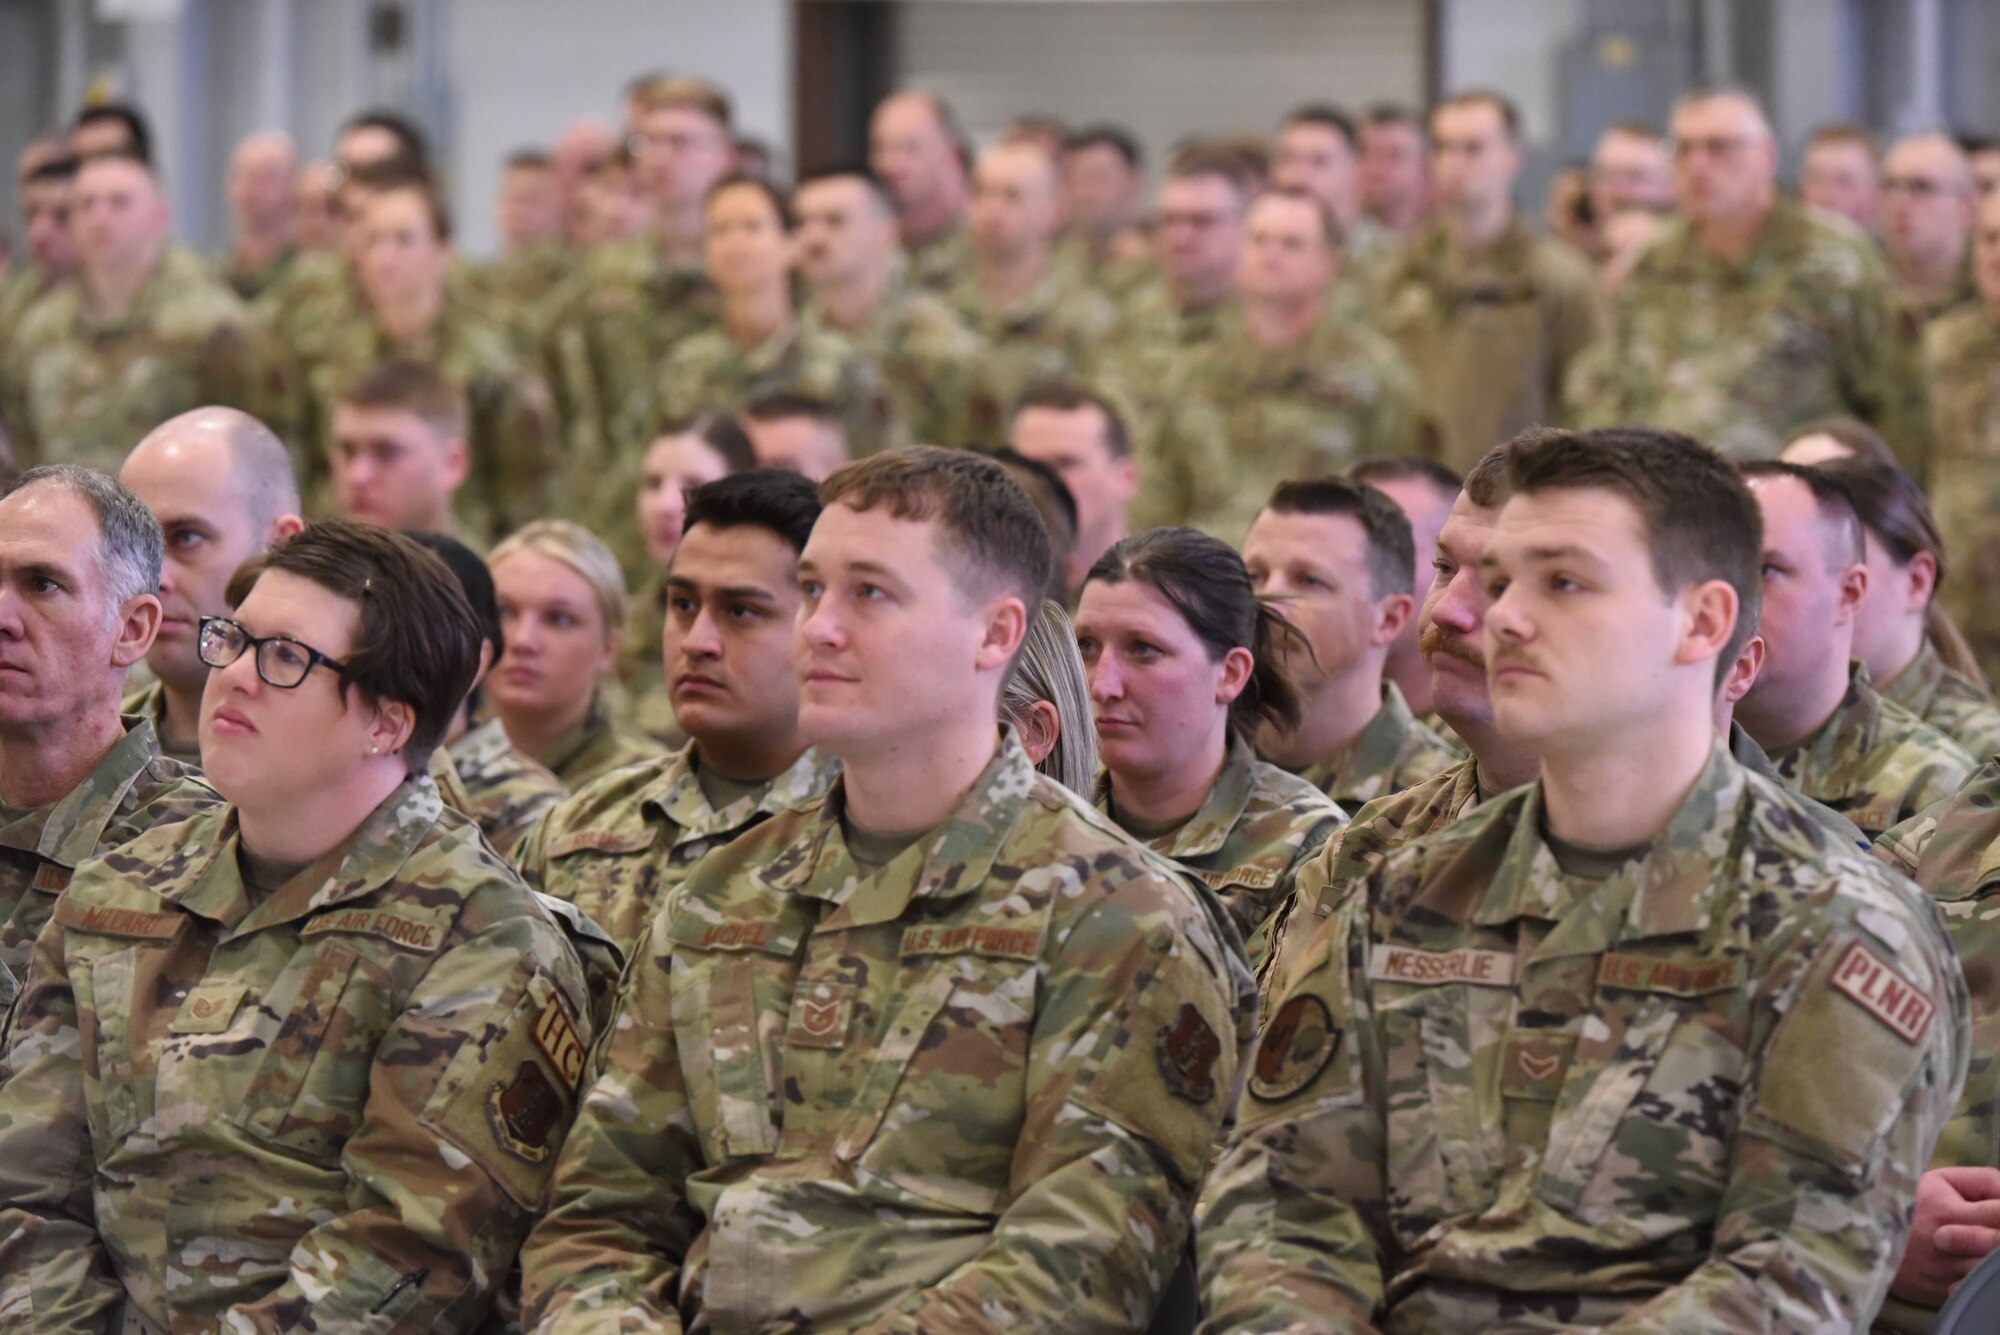 Airmen sit and stand in formation